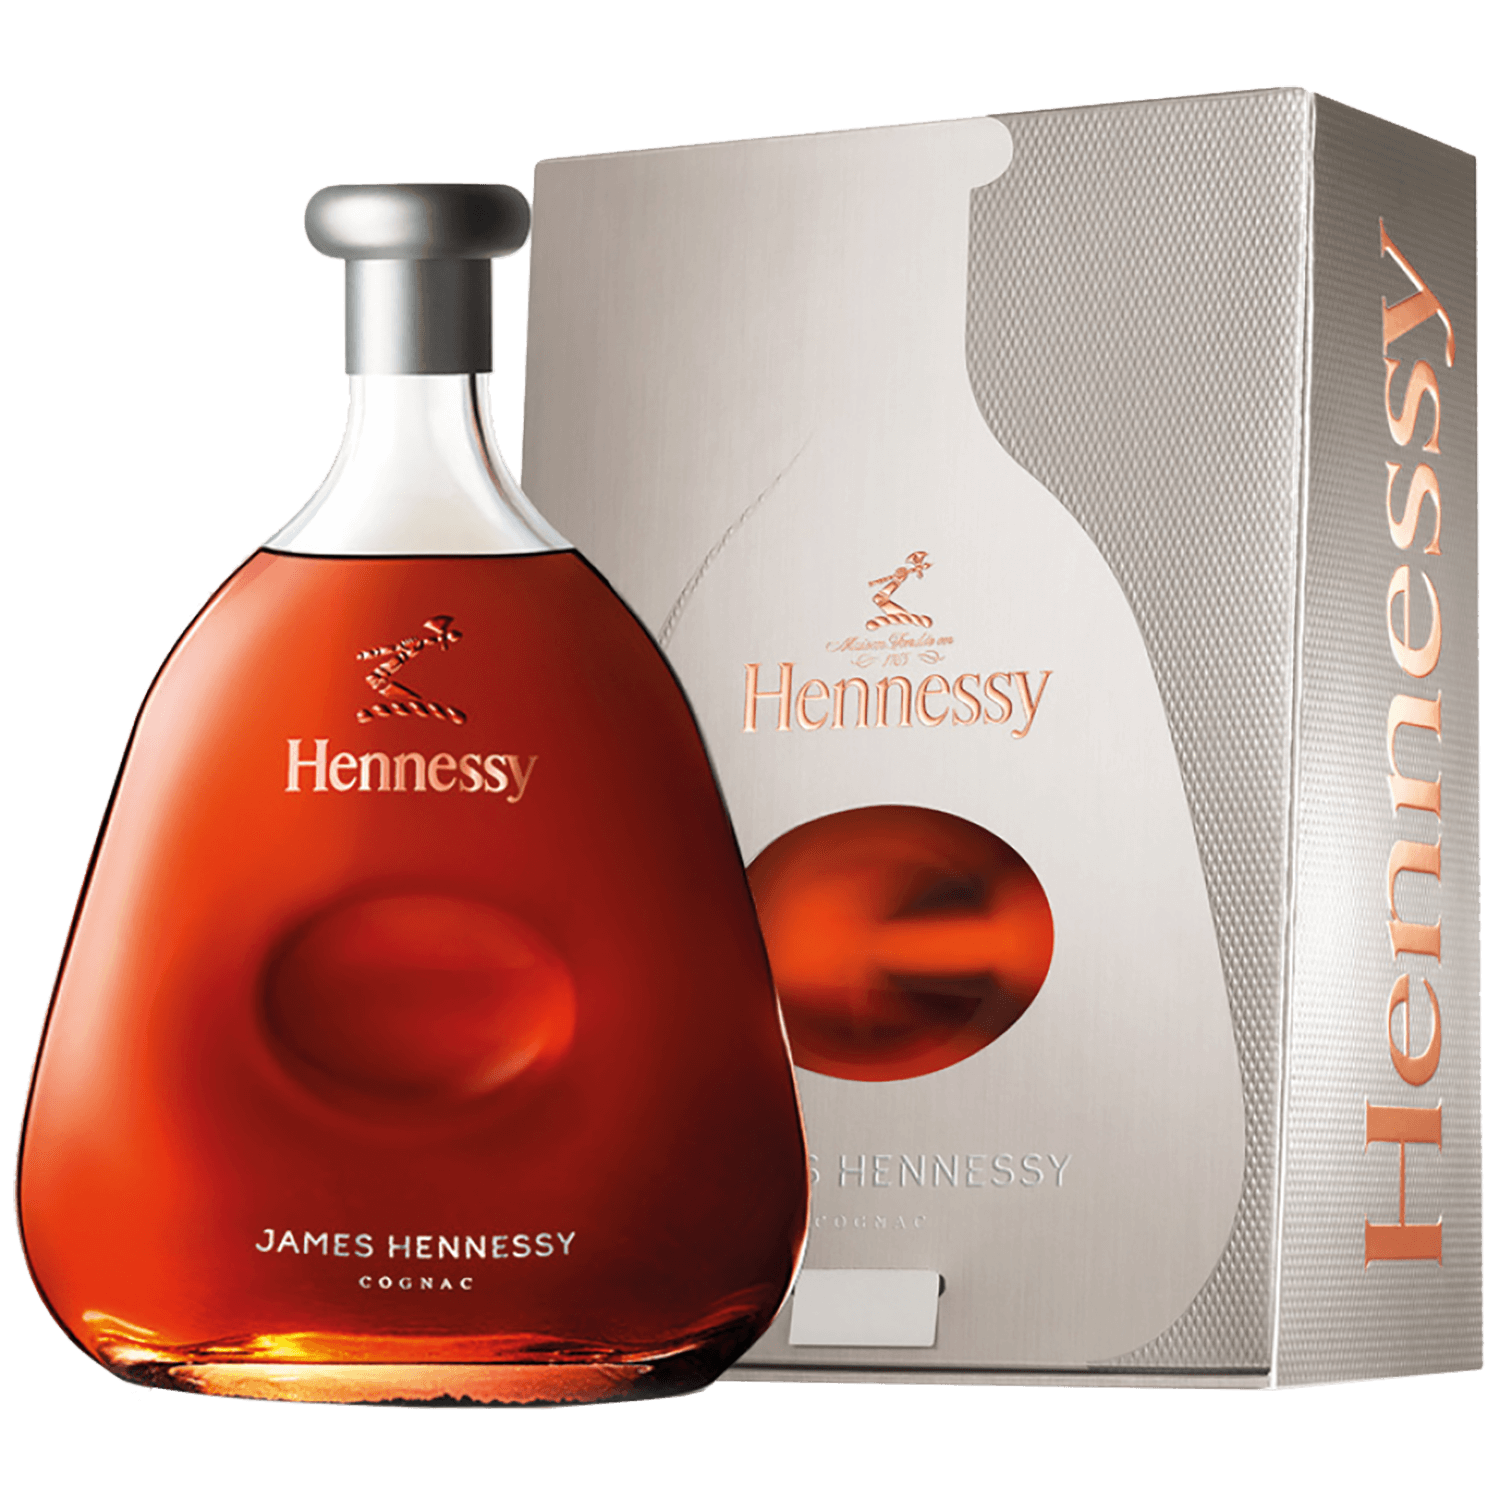 Hennessy James Hennessy Cognac (gift box) hennessy cognac vs gift box with 2 glasses